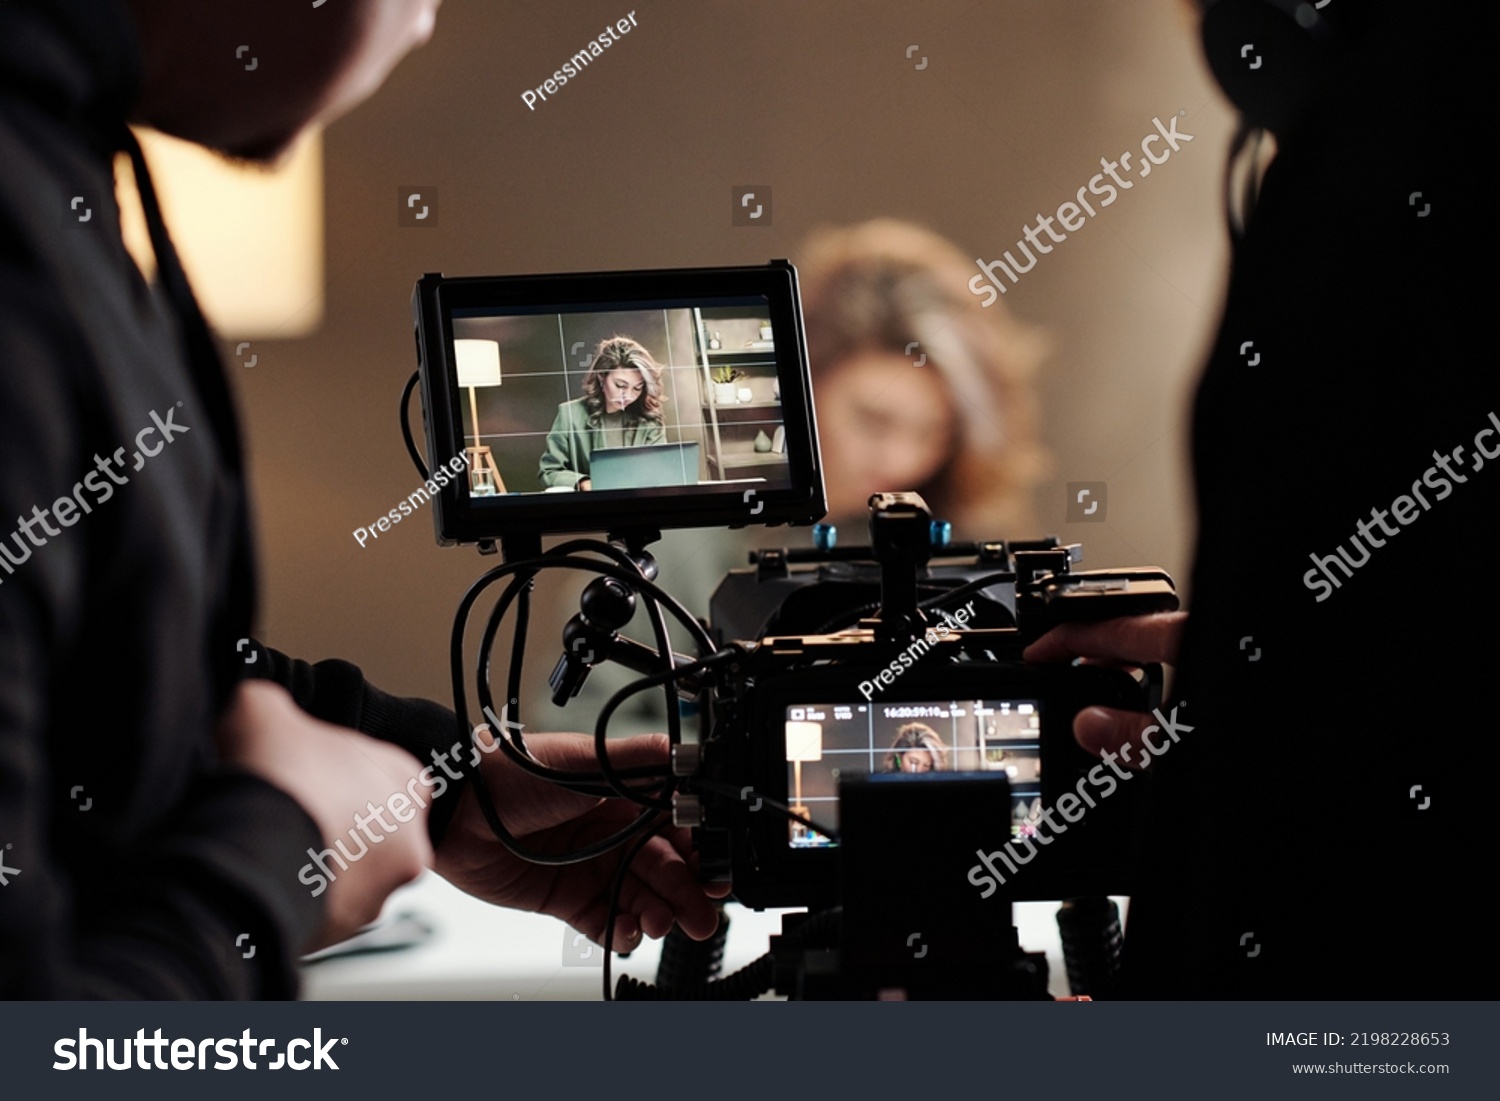 Close-up of steadicam screens with female model using laptop by table during commercial being shot by cameraman and his assistant #2198228653